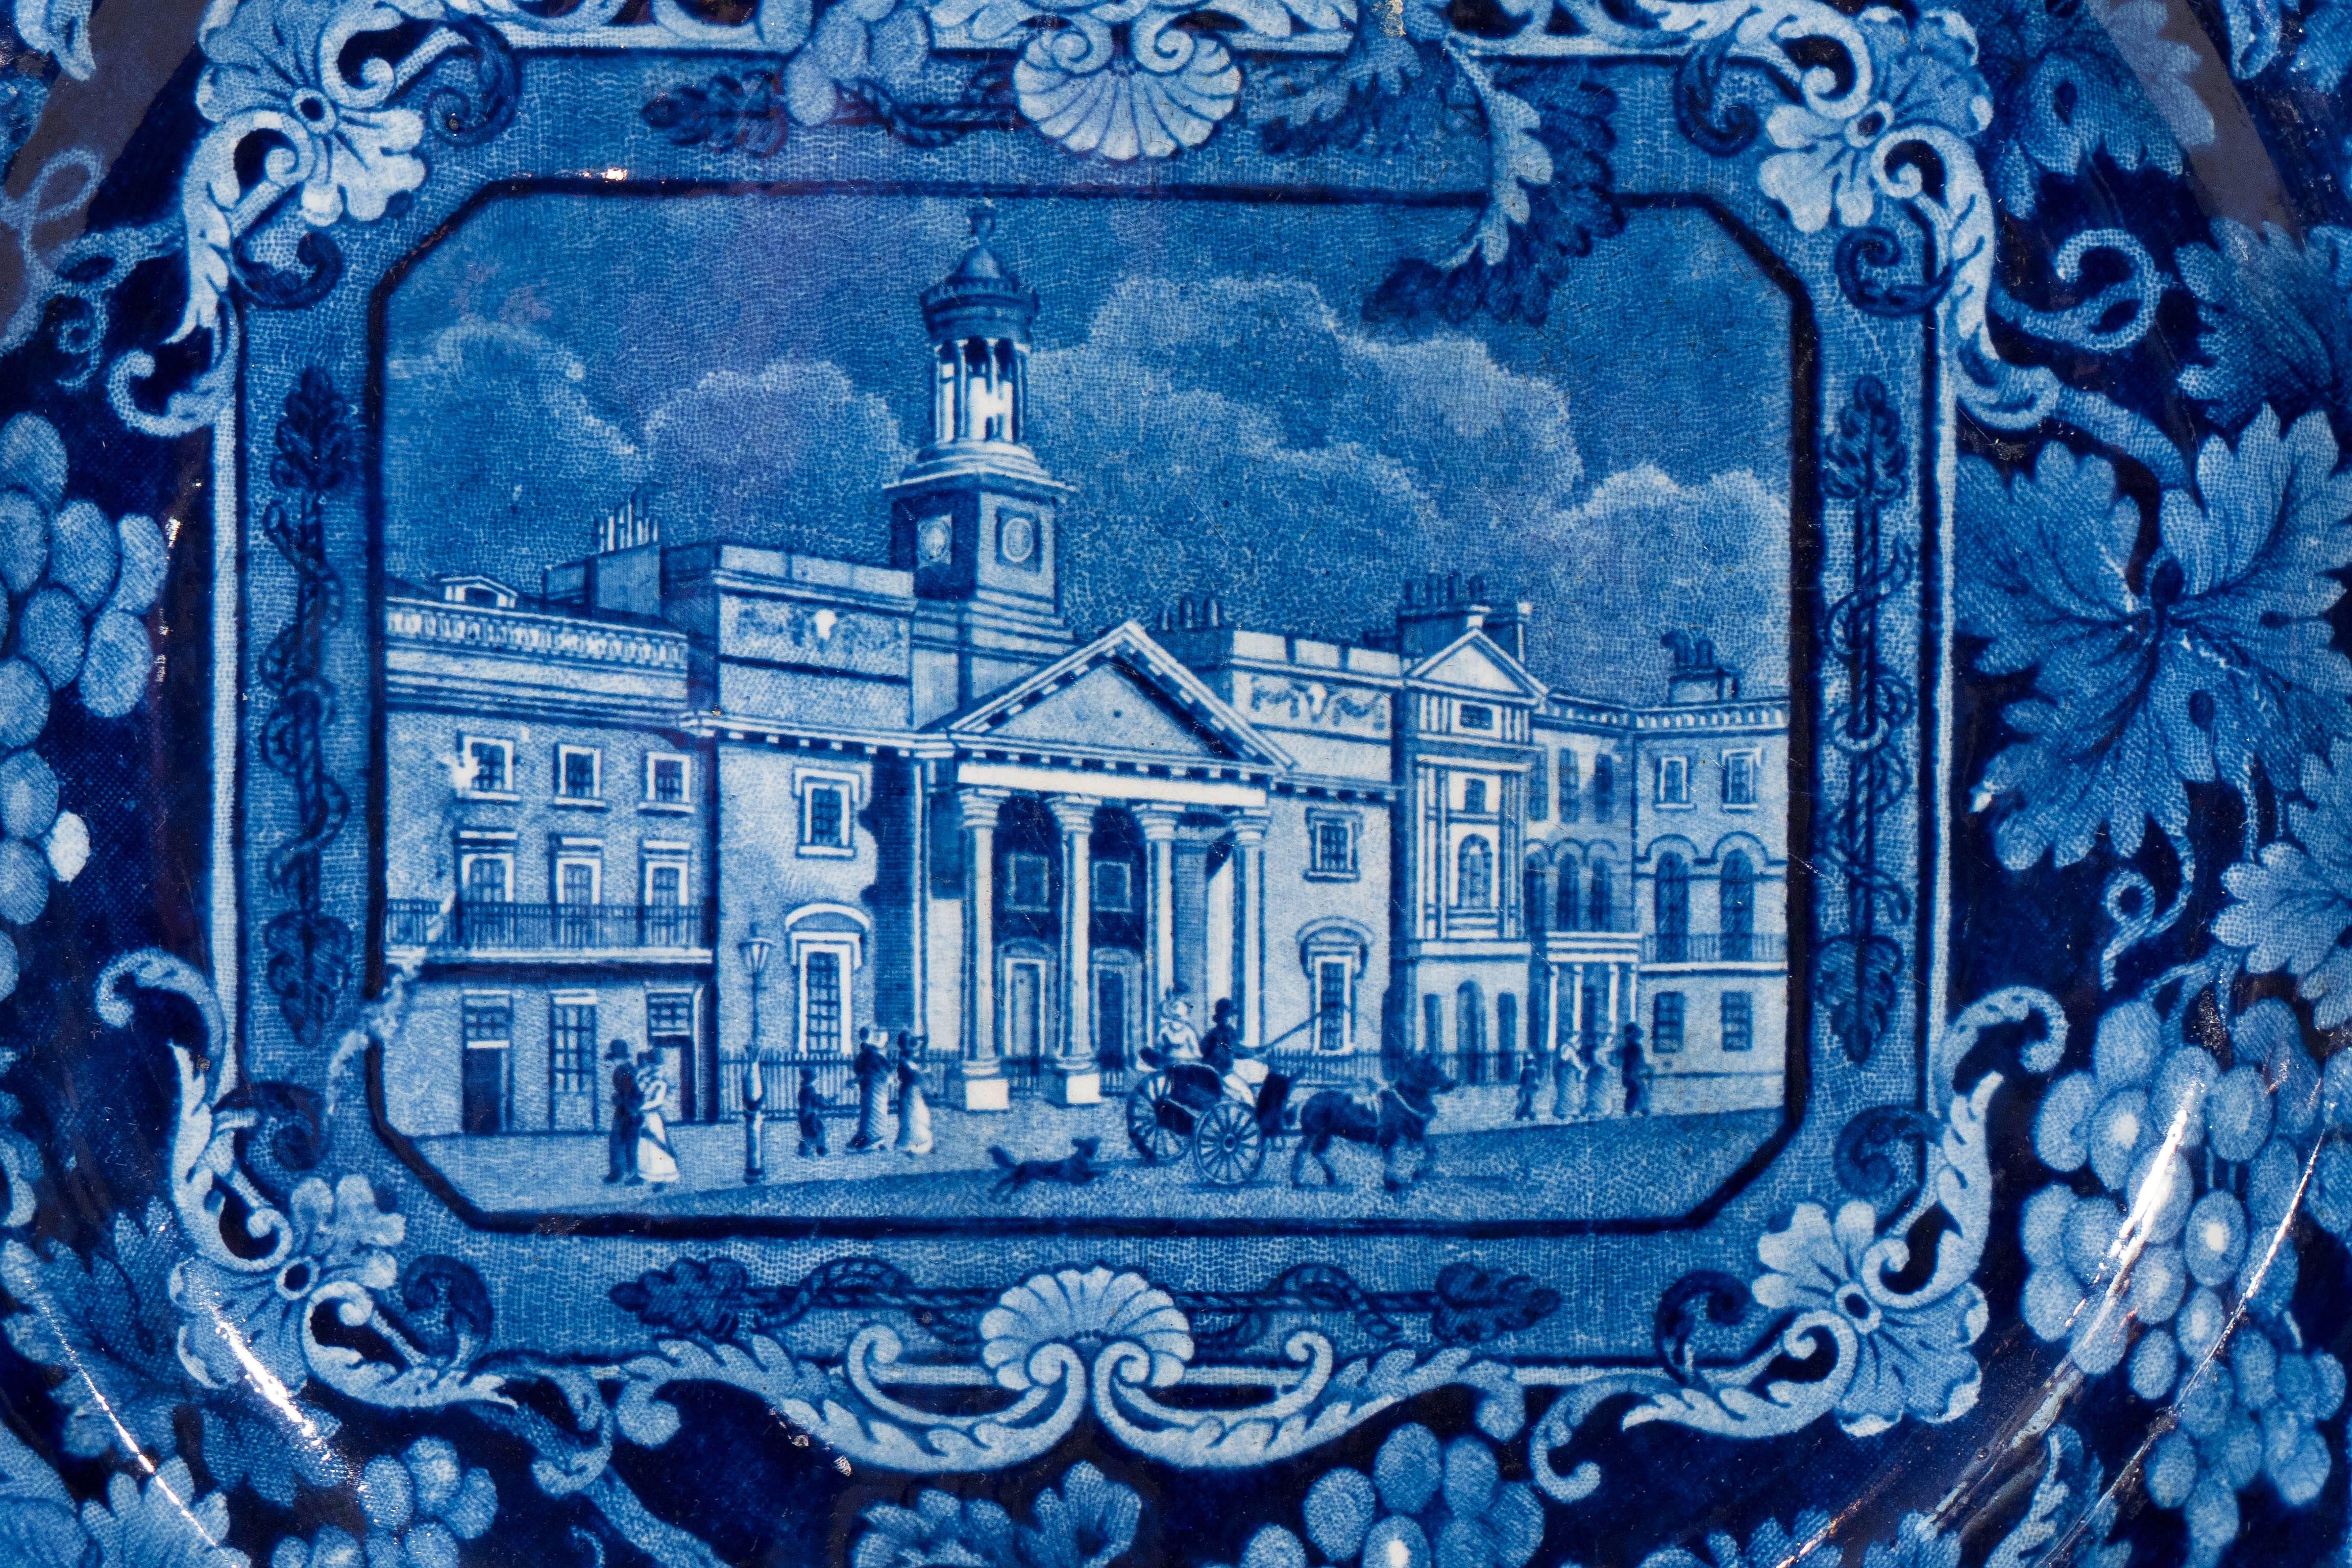 Blue and white Staffordhsire plate with 